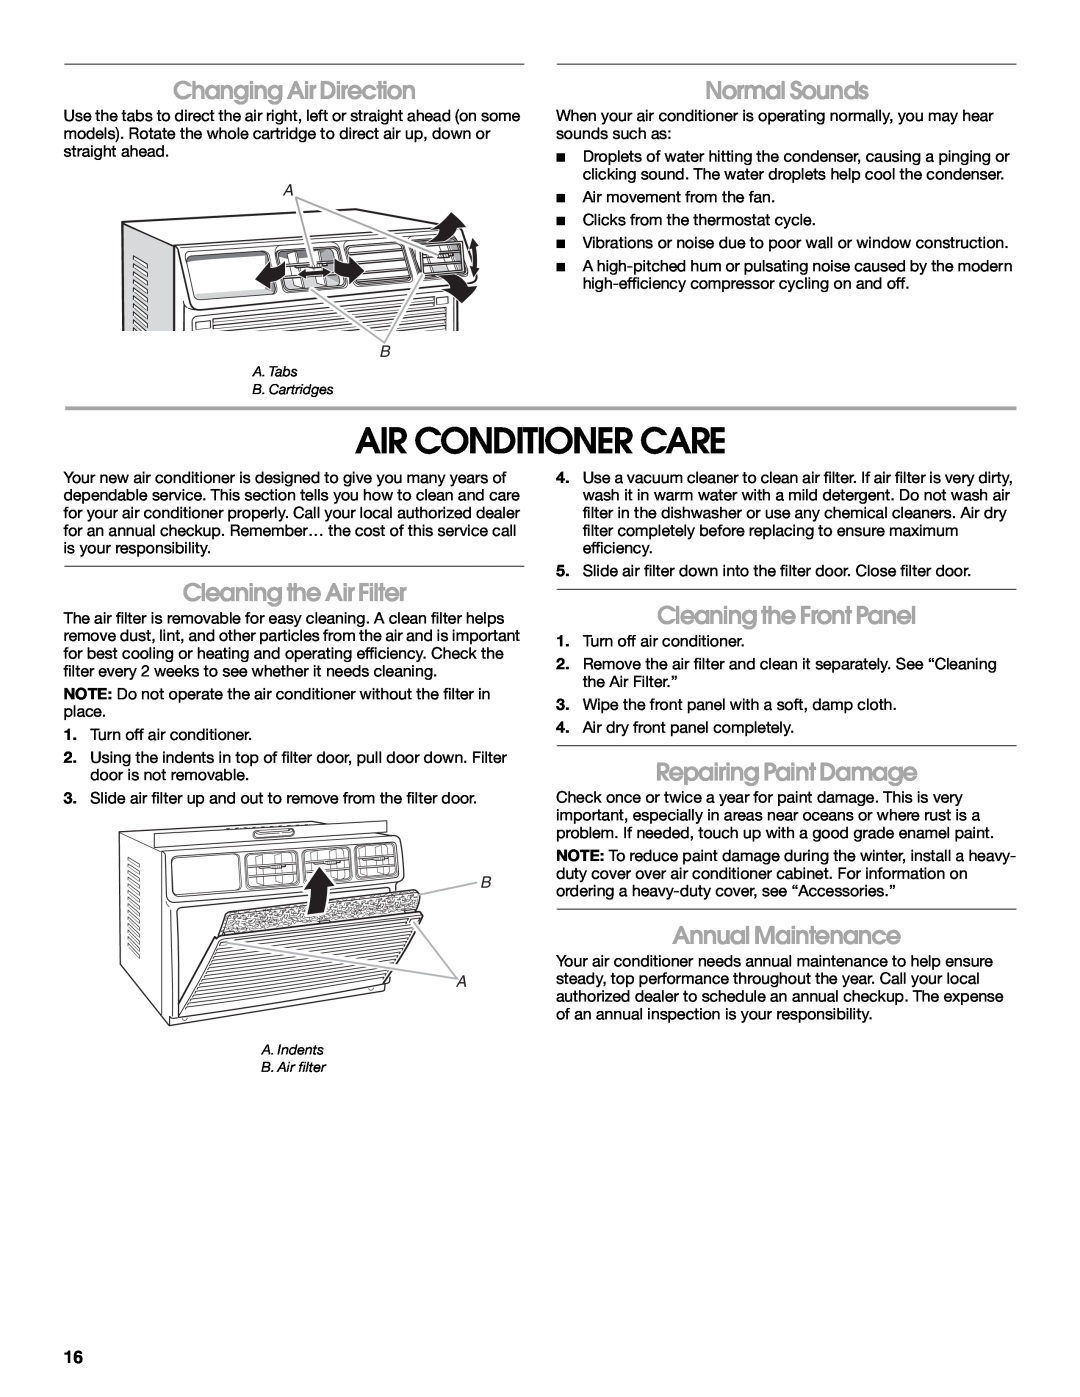 Whirlpool ACE184XR0 manual Air Conditioner Care, Changing Air Direction, Normal Sounds, Cleaning the Air Filter 